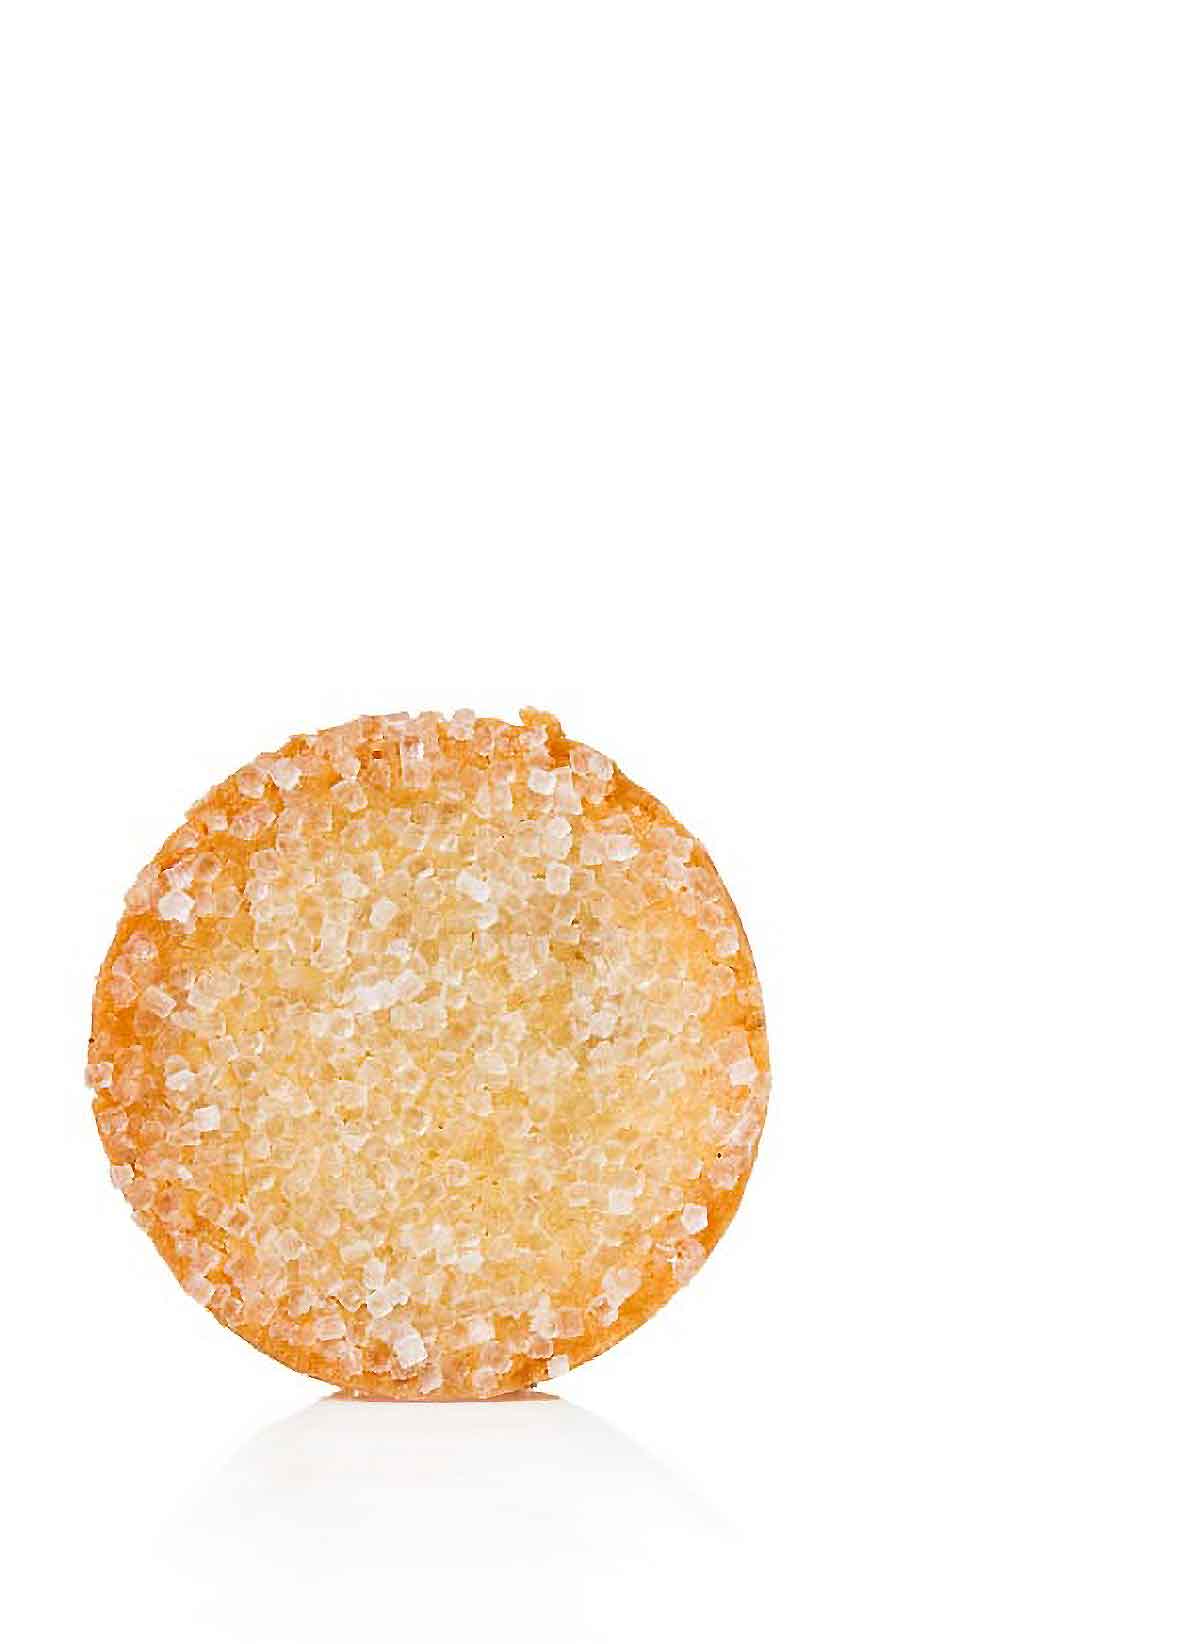 One French sable cookies on a white background